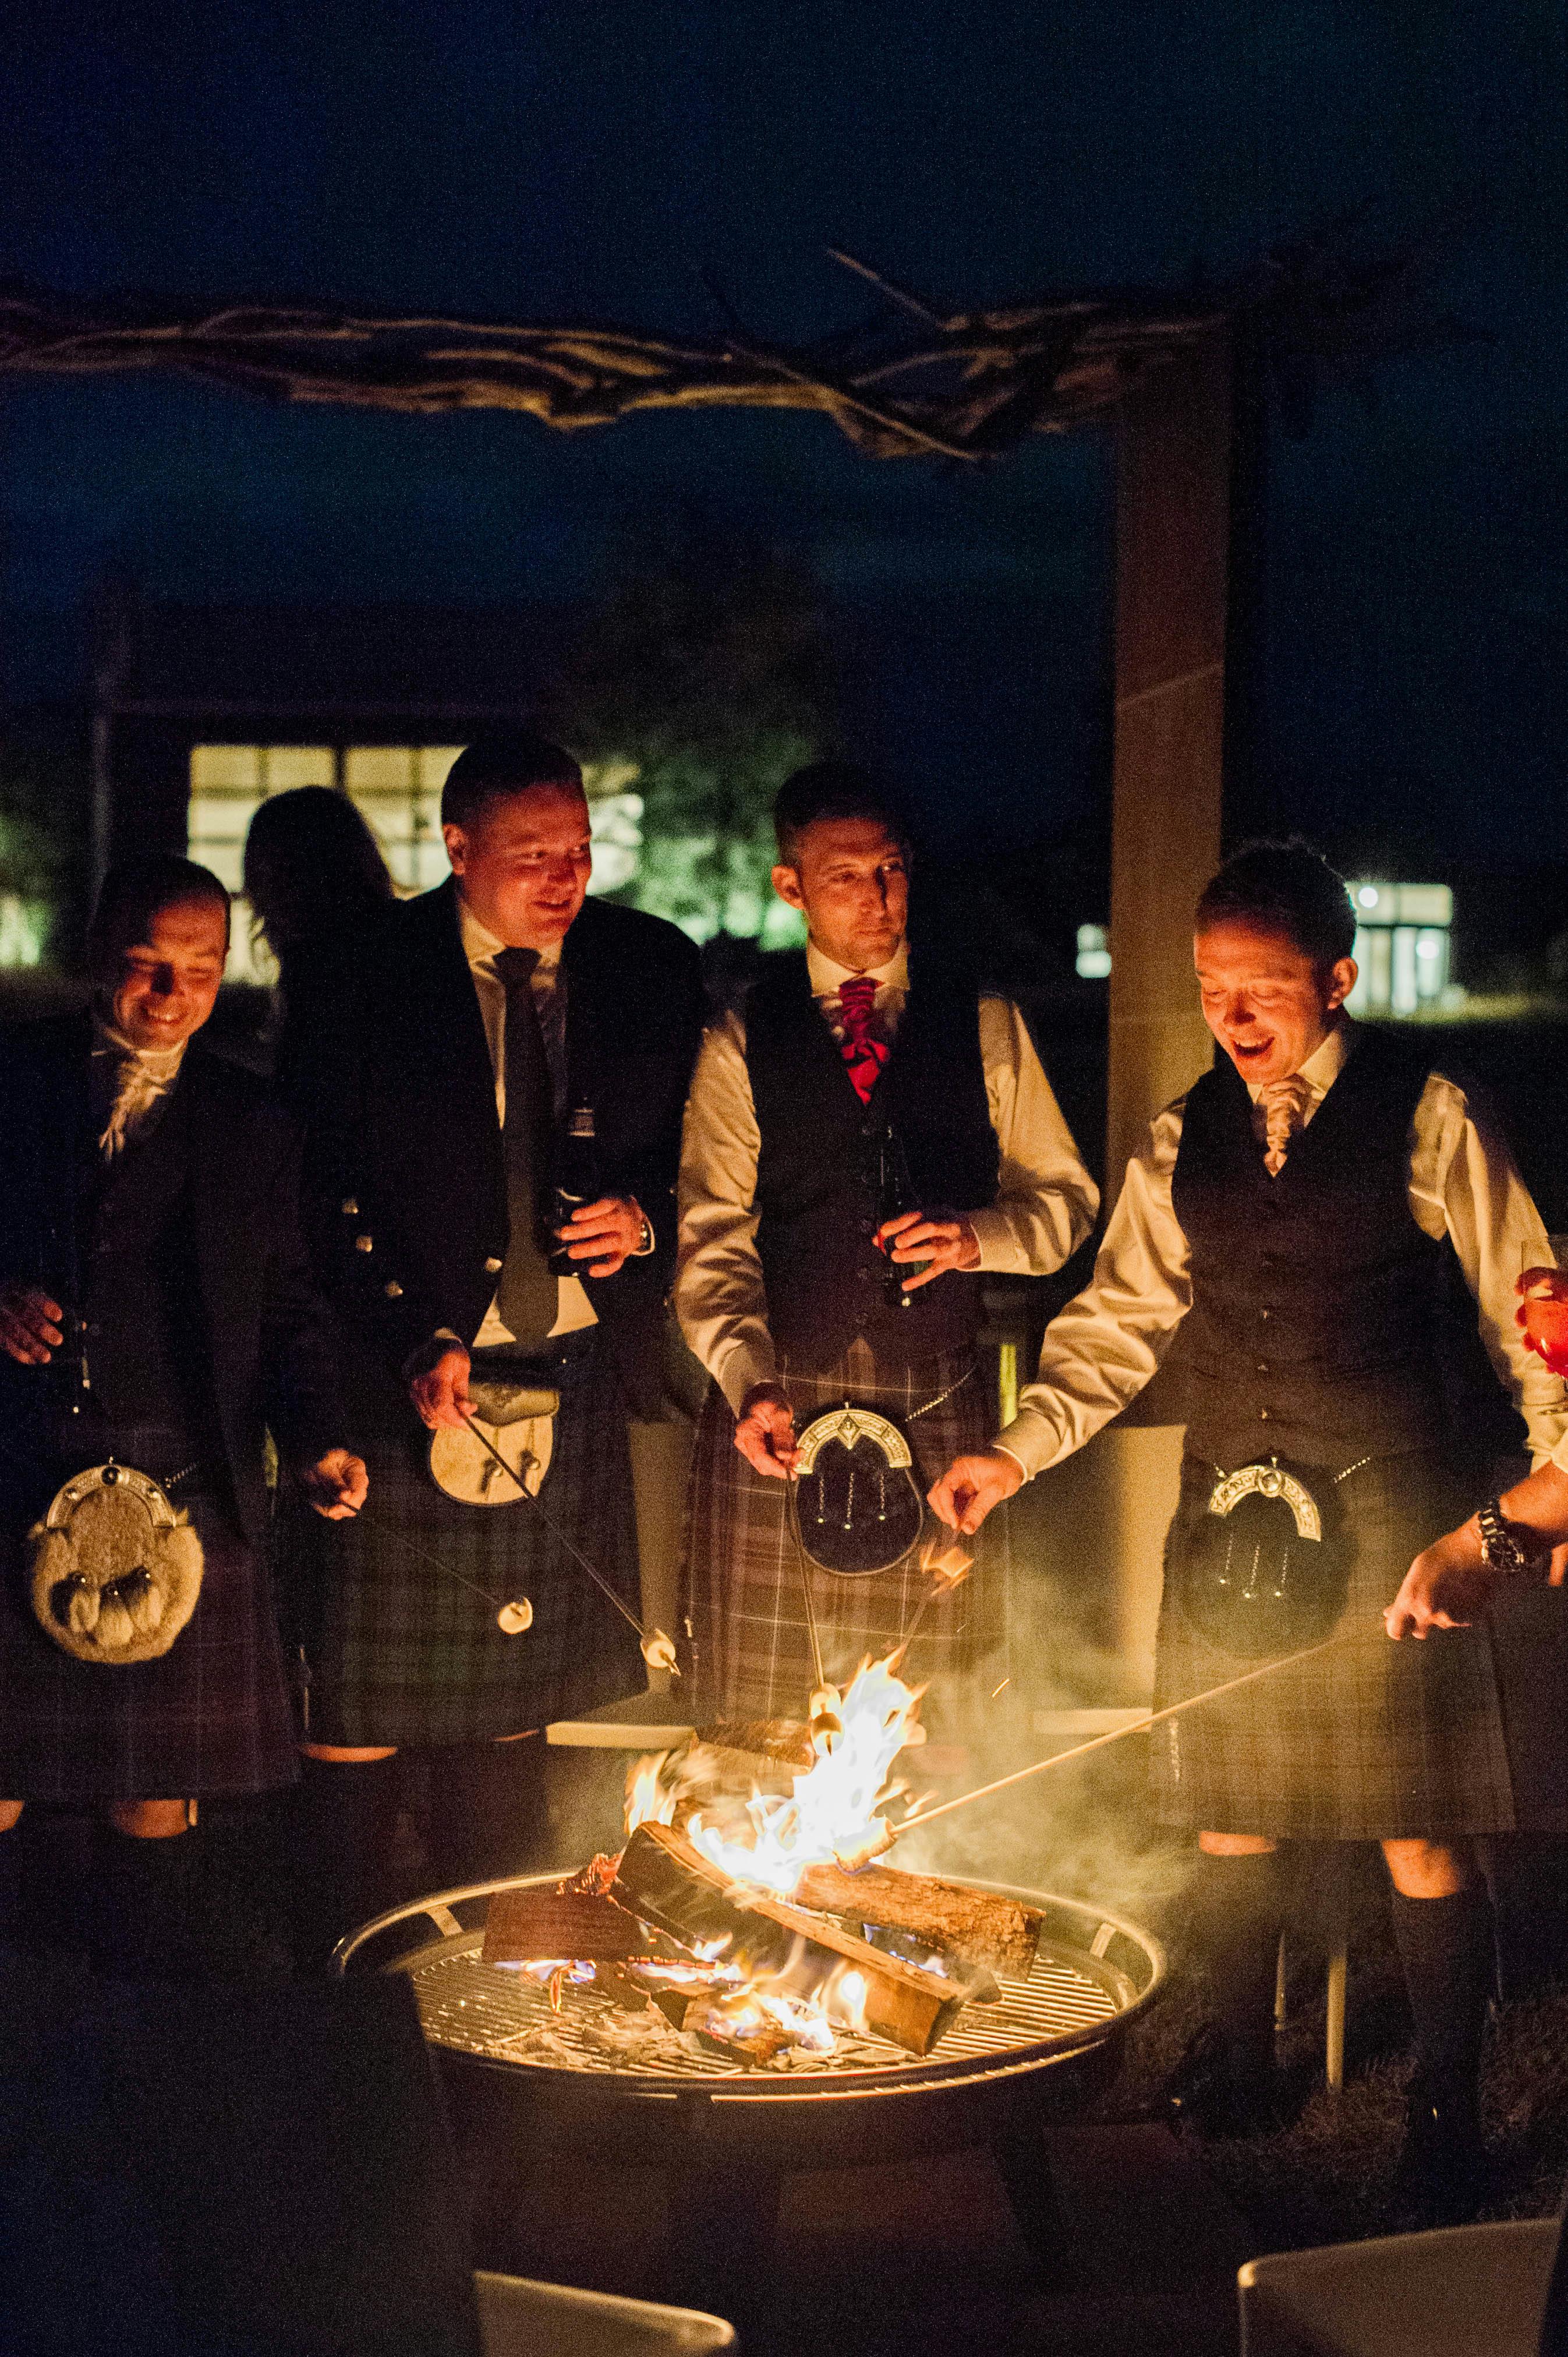 Scottish-Style Wedding in Washington DC With S'mores and Campfire | PartySlate